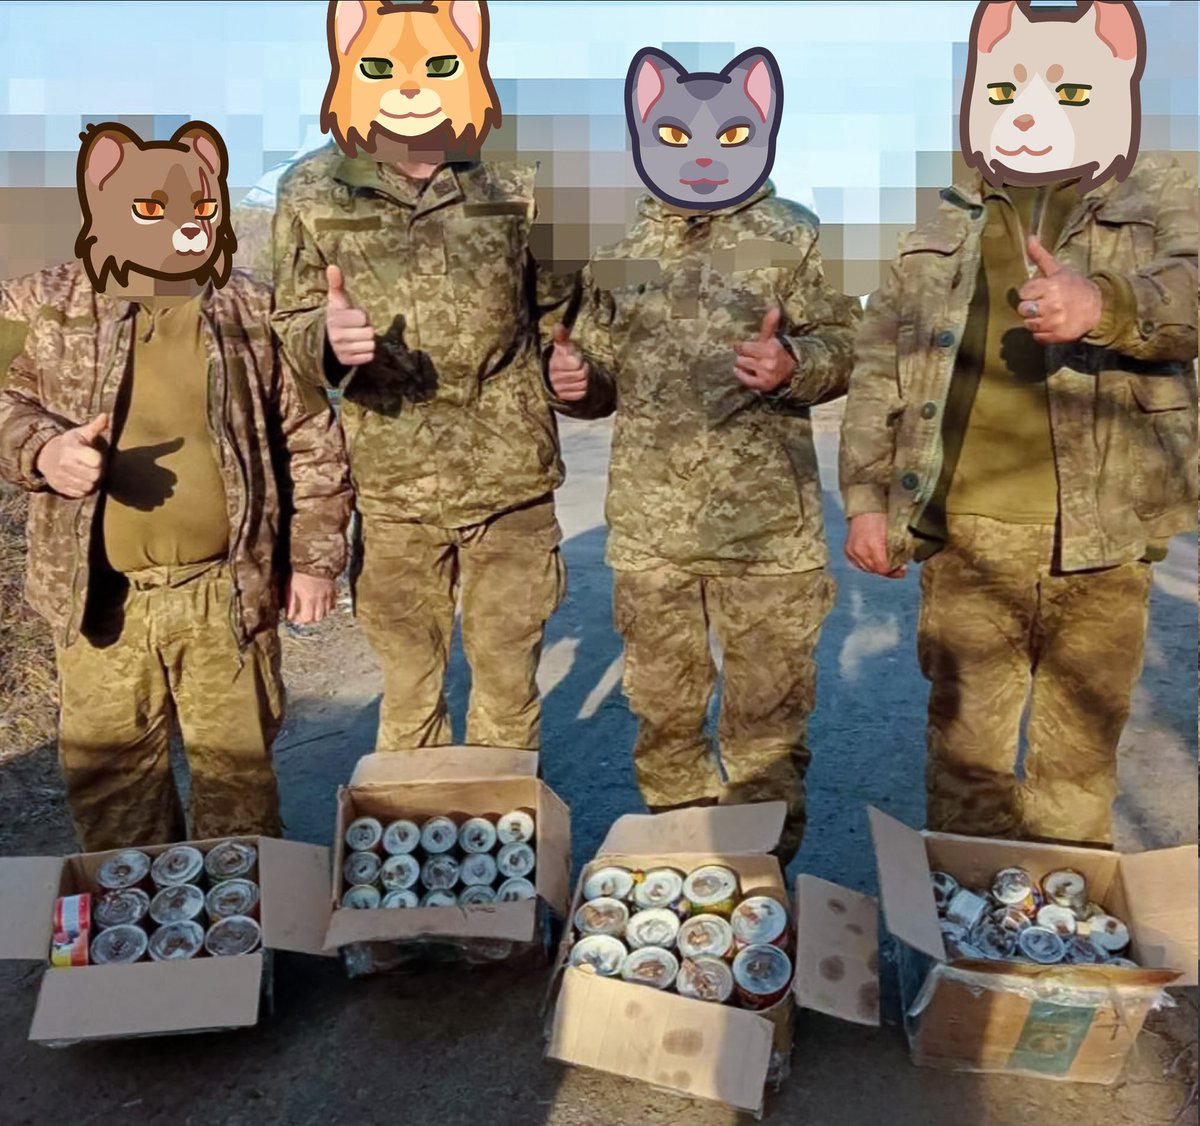 Brave #fellas of the 57th brigade received #trenchcandles and these guys need some 🚫🦟ones. 
Make more together:
PP alpenhogs@te.net.ua - #Candles 

#tuesdayvibe #TuesNews #TuesdayMotivaton #SupportUkraine #UkraineRussiaWar #NAFOworks #NAFOExpansionIsNonNegotiable #UAarmy